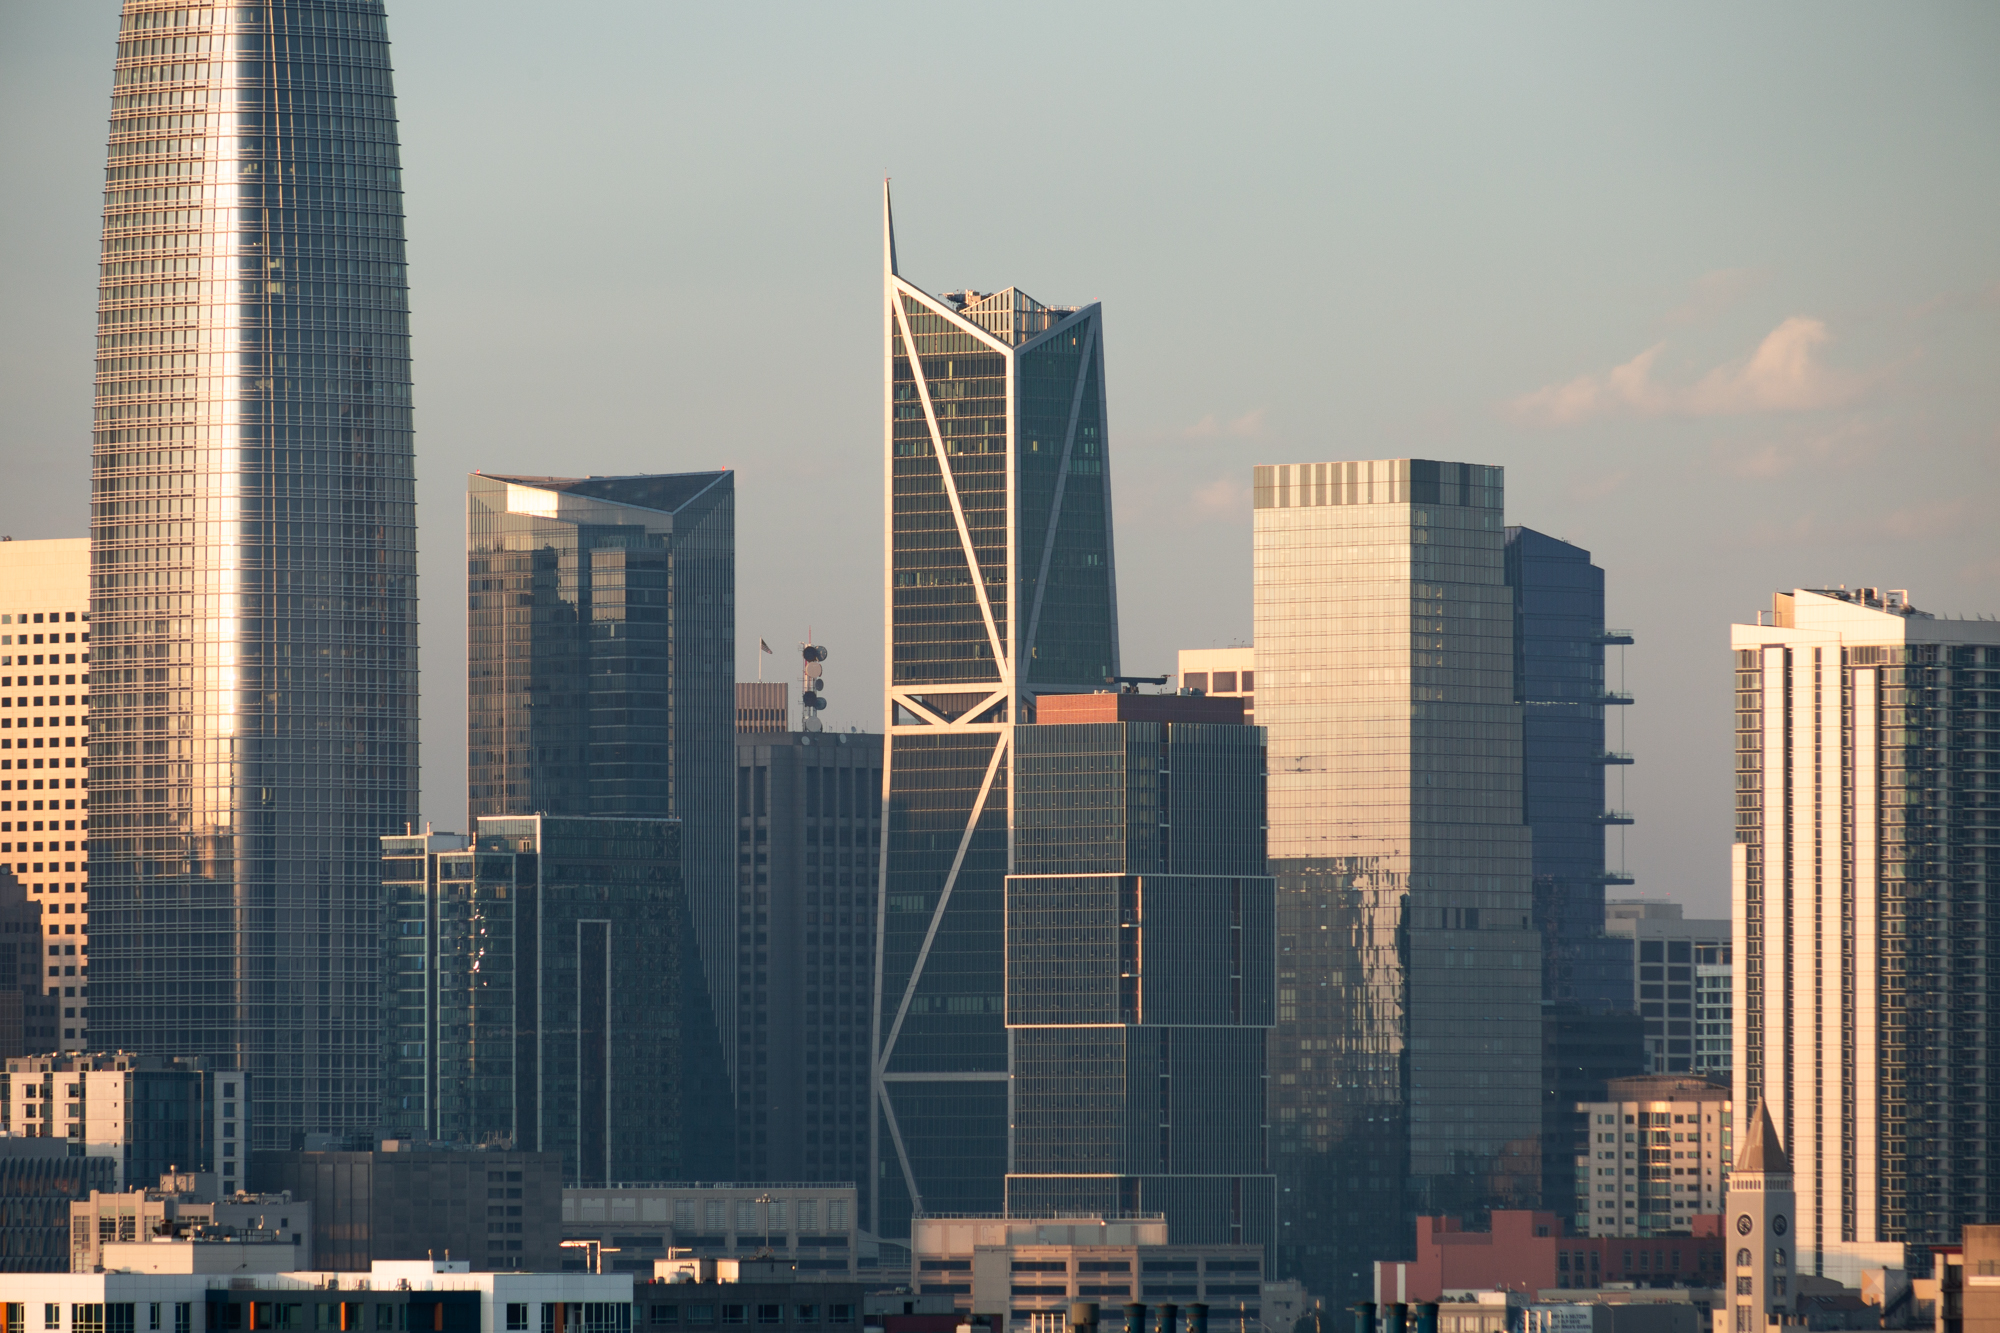 181 Fremont Street fit in the skyline between Salesforce Tower, Millennium Tower, 500 Folsom Street, and The Avery, image by Andrew Campbell Nelson